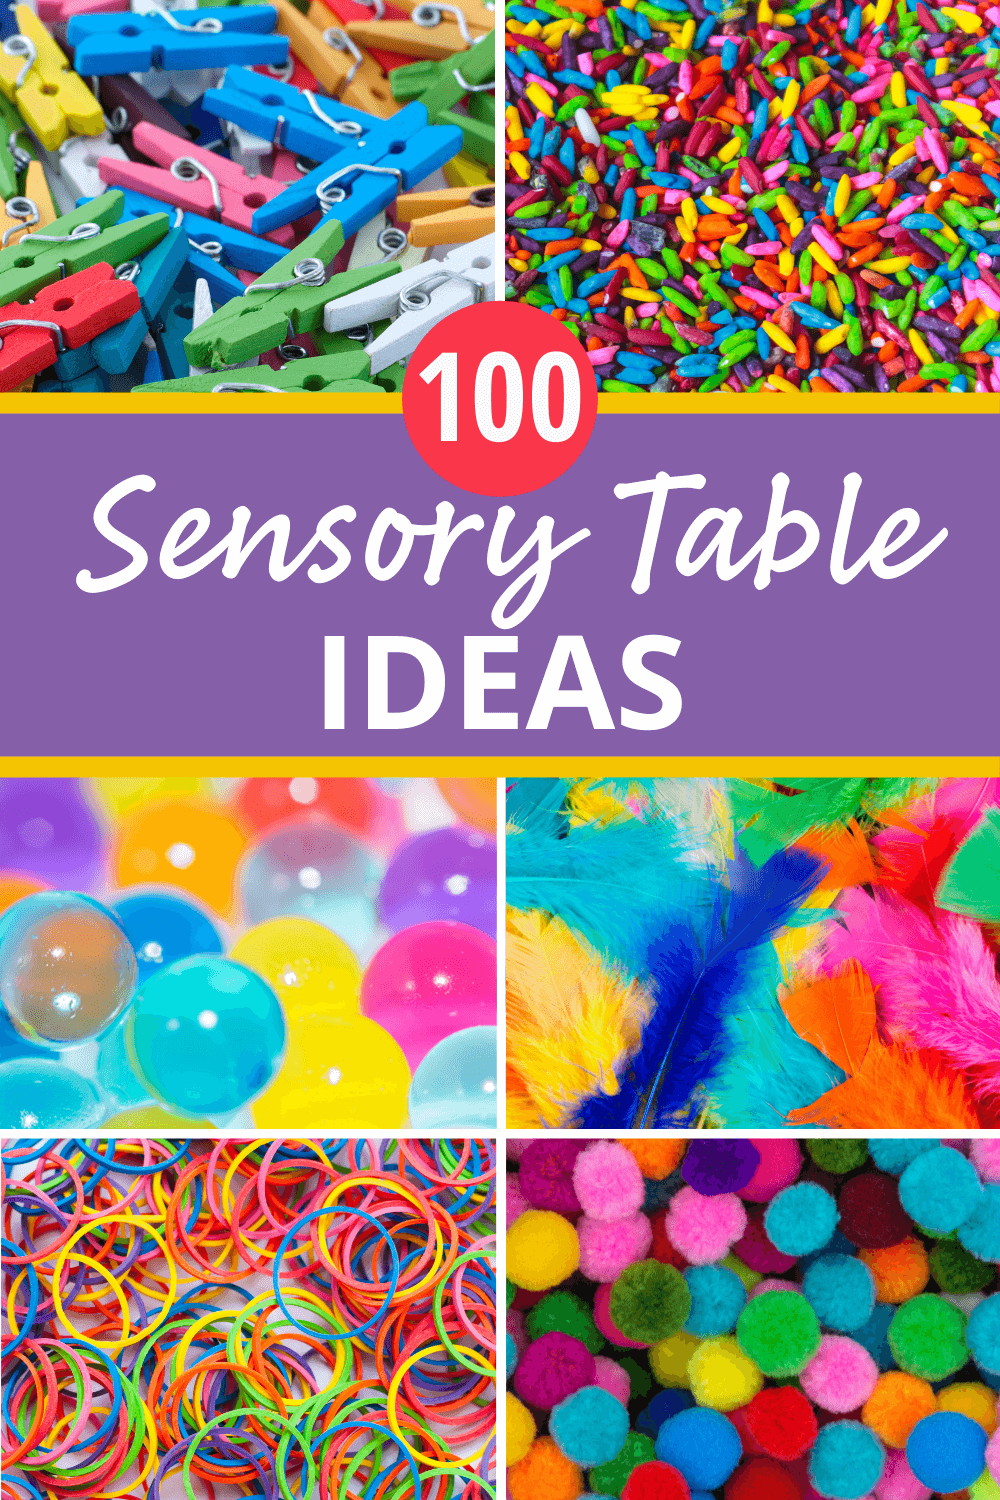 The Sensory Table Materials List That Will Make Your Life Easier